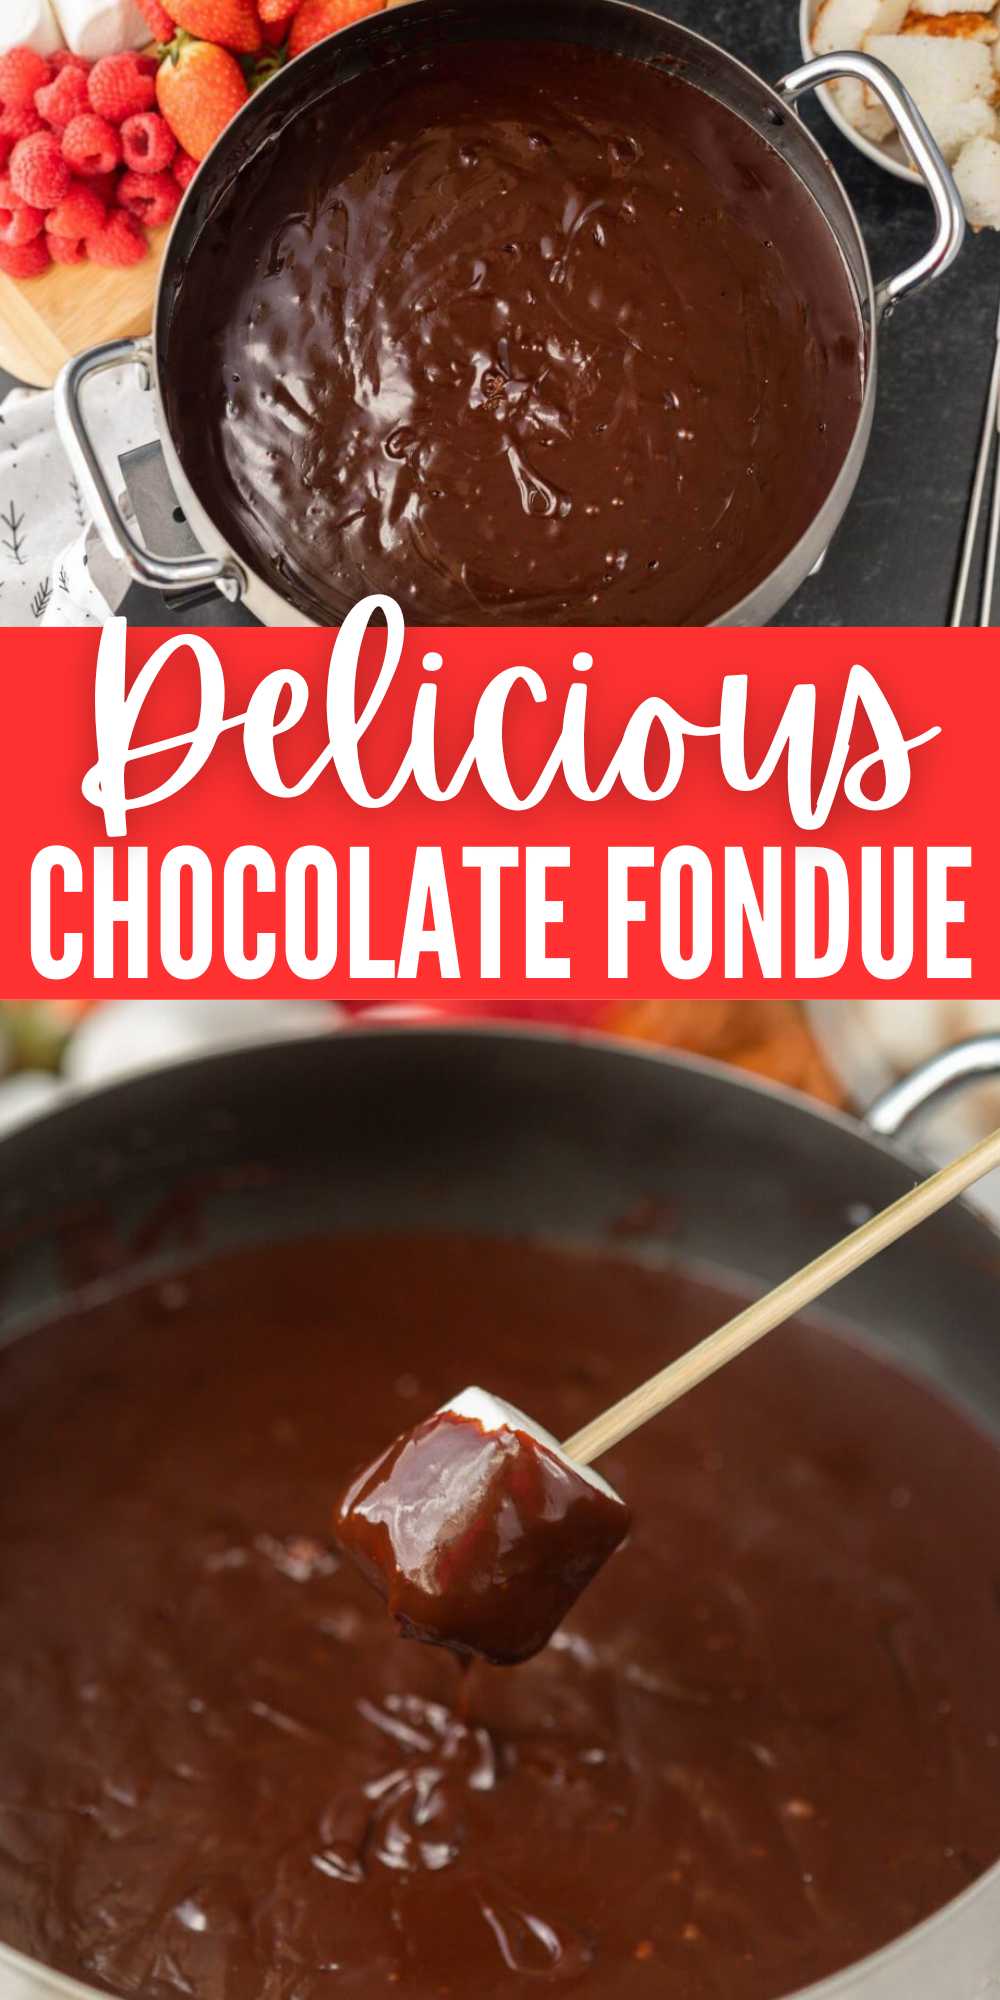 If you are looking for a fun party dip, make Chocolate Fondue Recipe. Dip your favorite fresh fruit, marshmallows or angel food cake. This chocolate fondue is perfect for Valentines Day, New Year's Eve or for a weeknight dessert. It is made with simple ingredients and always a family favorite. #eatingonadime #chocolatefondue #fondue